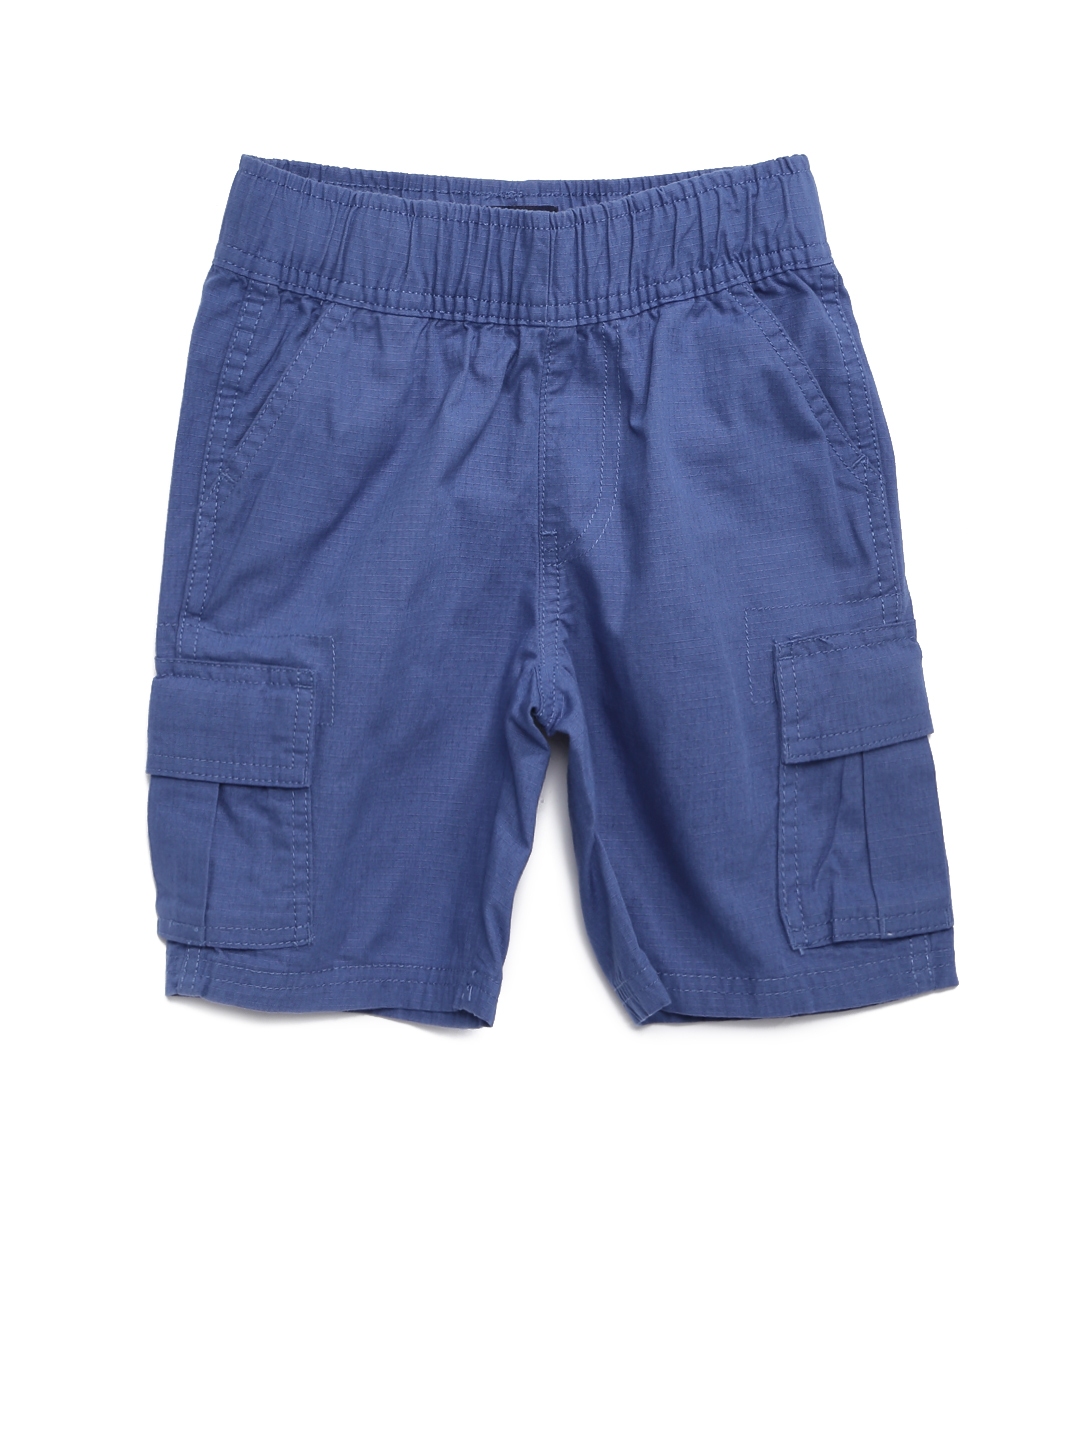 Buy The Childrens Place Boys Blue Solid Regular Fit Cargo Shorts ...